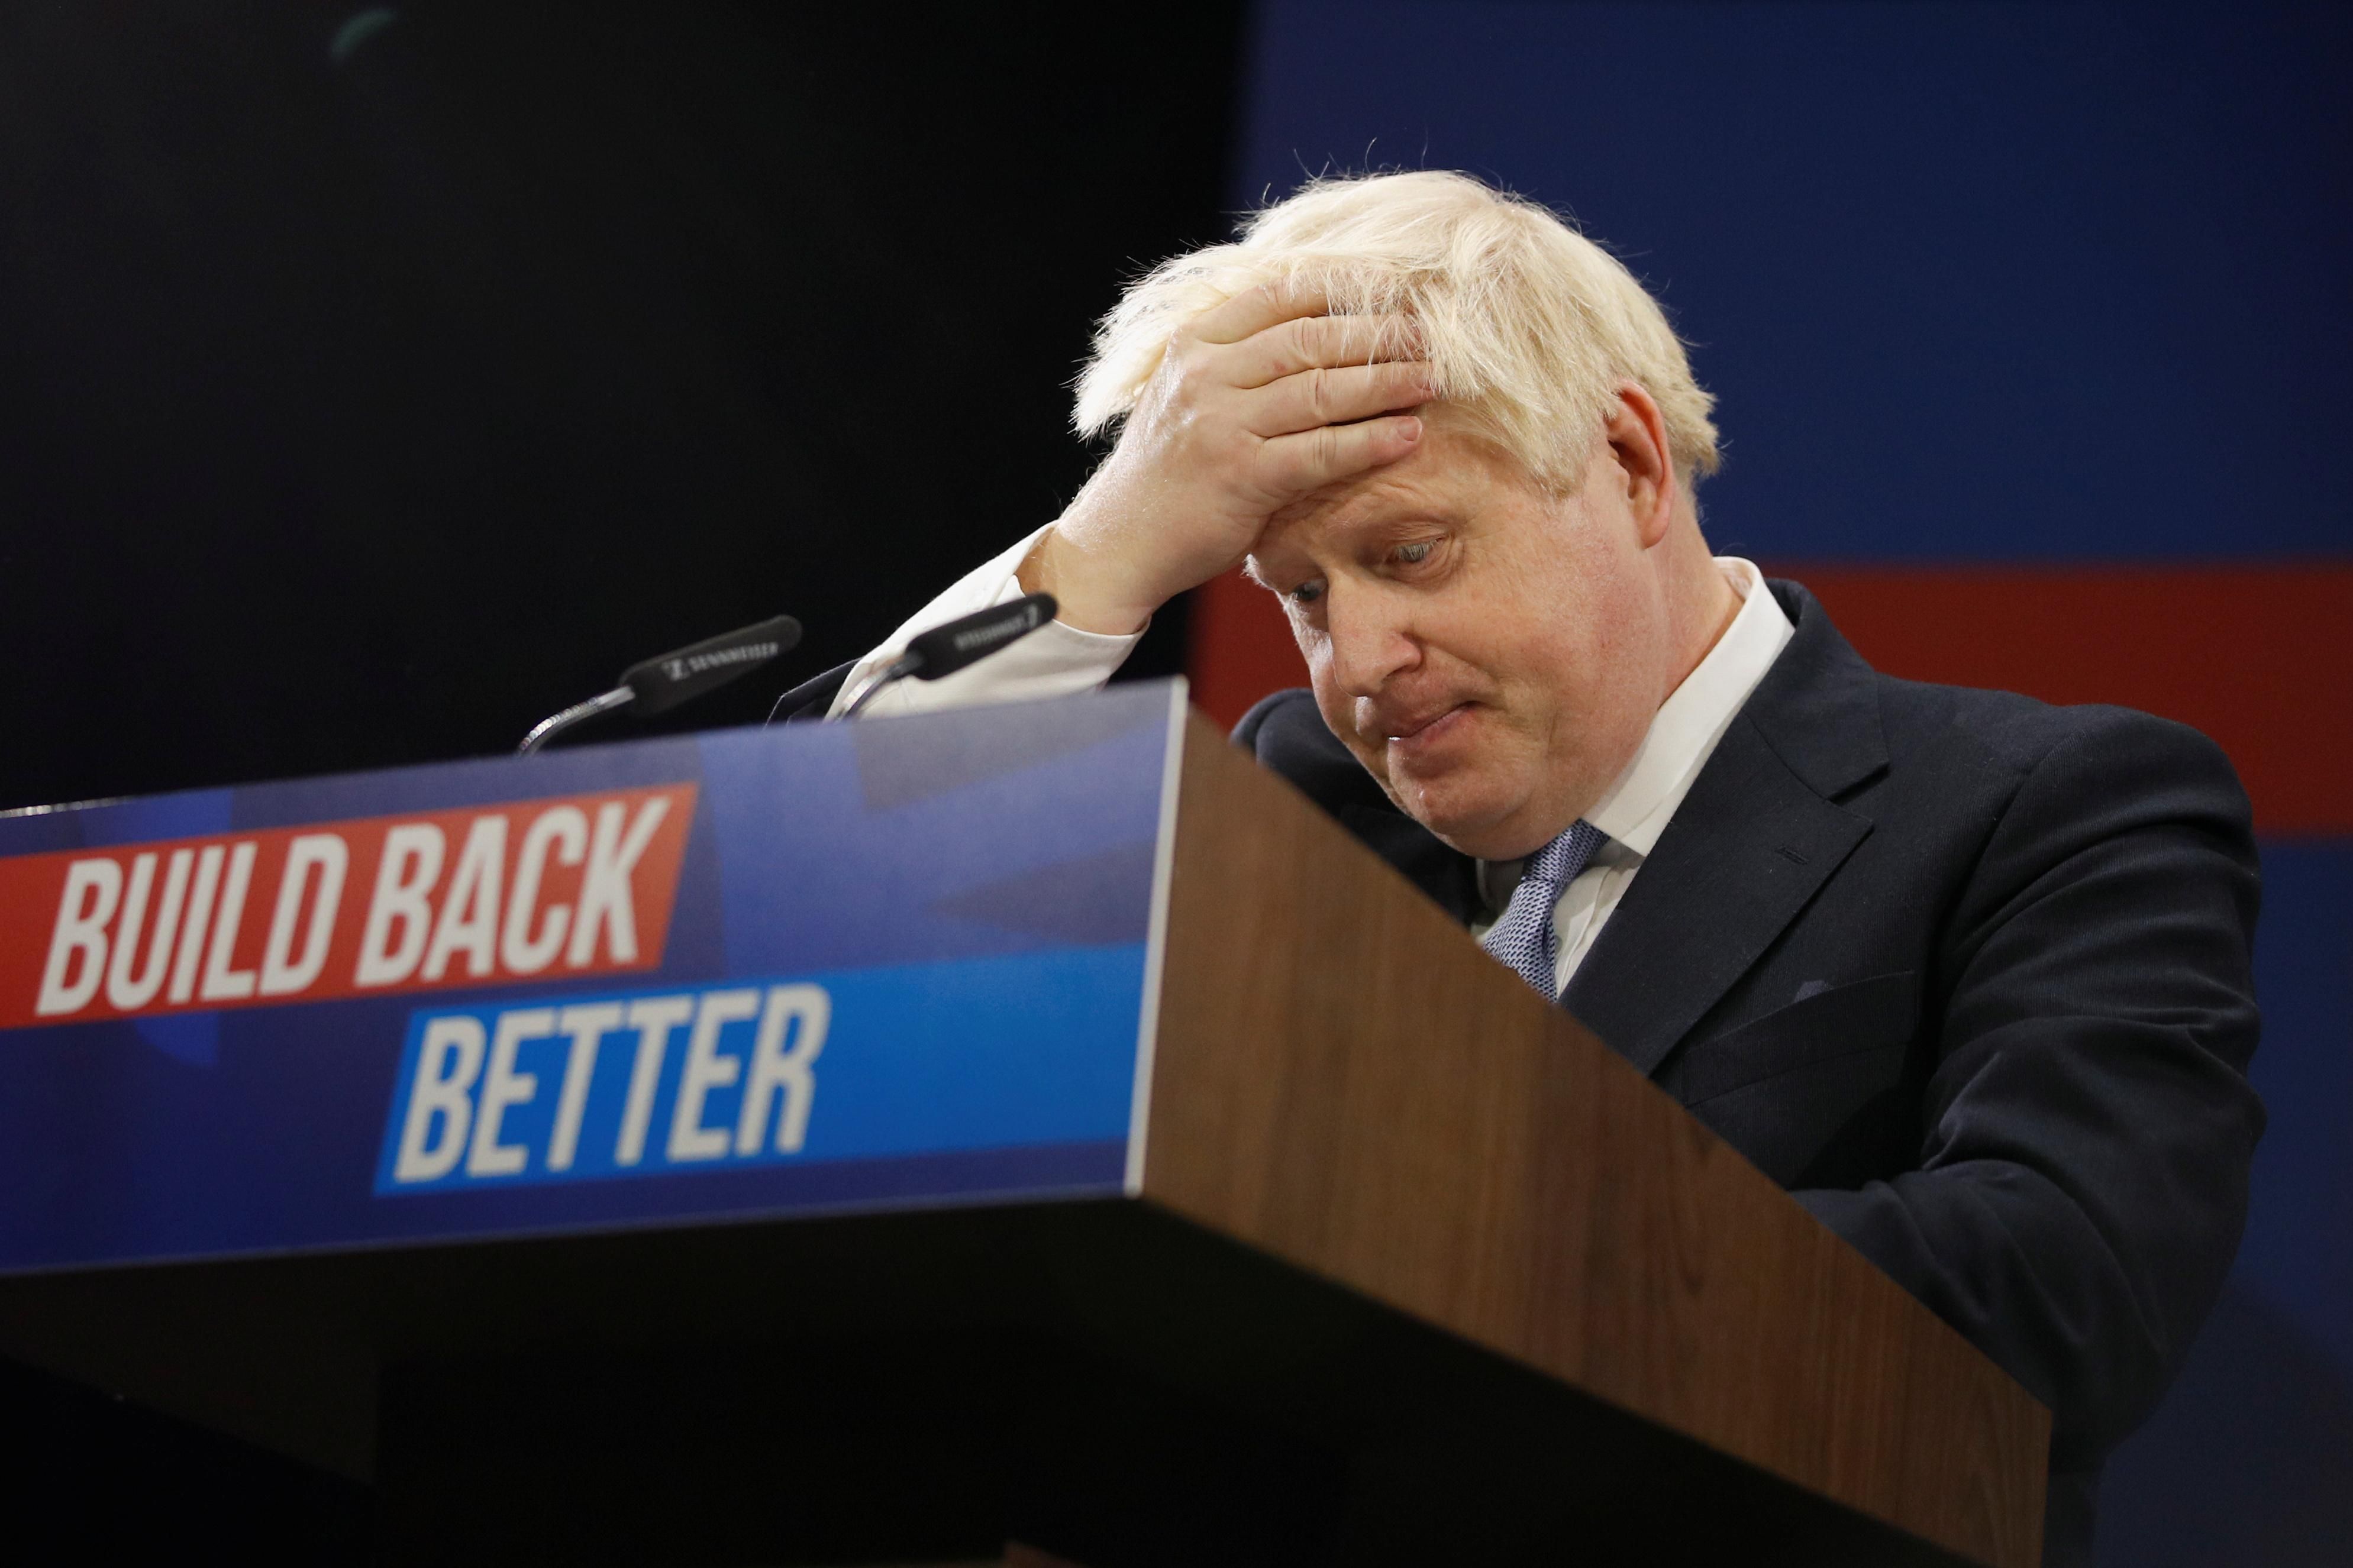 Britain's Prime Minister Boris Johnson reacts as he delivers a speech during the annual Conservative Party Conference, in Manchester, Britain, October 6, 2021.